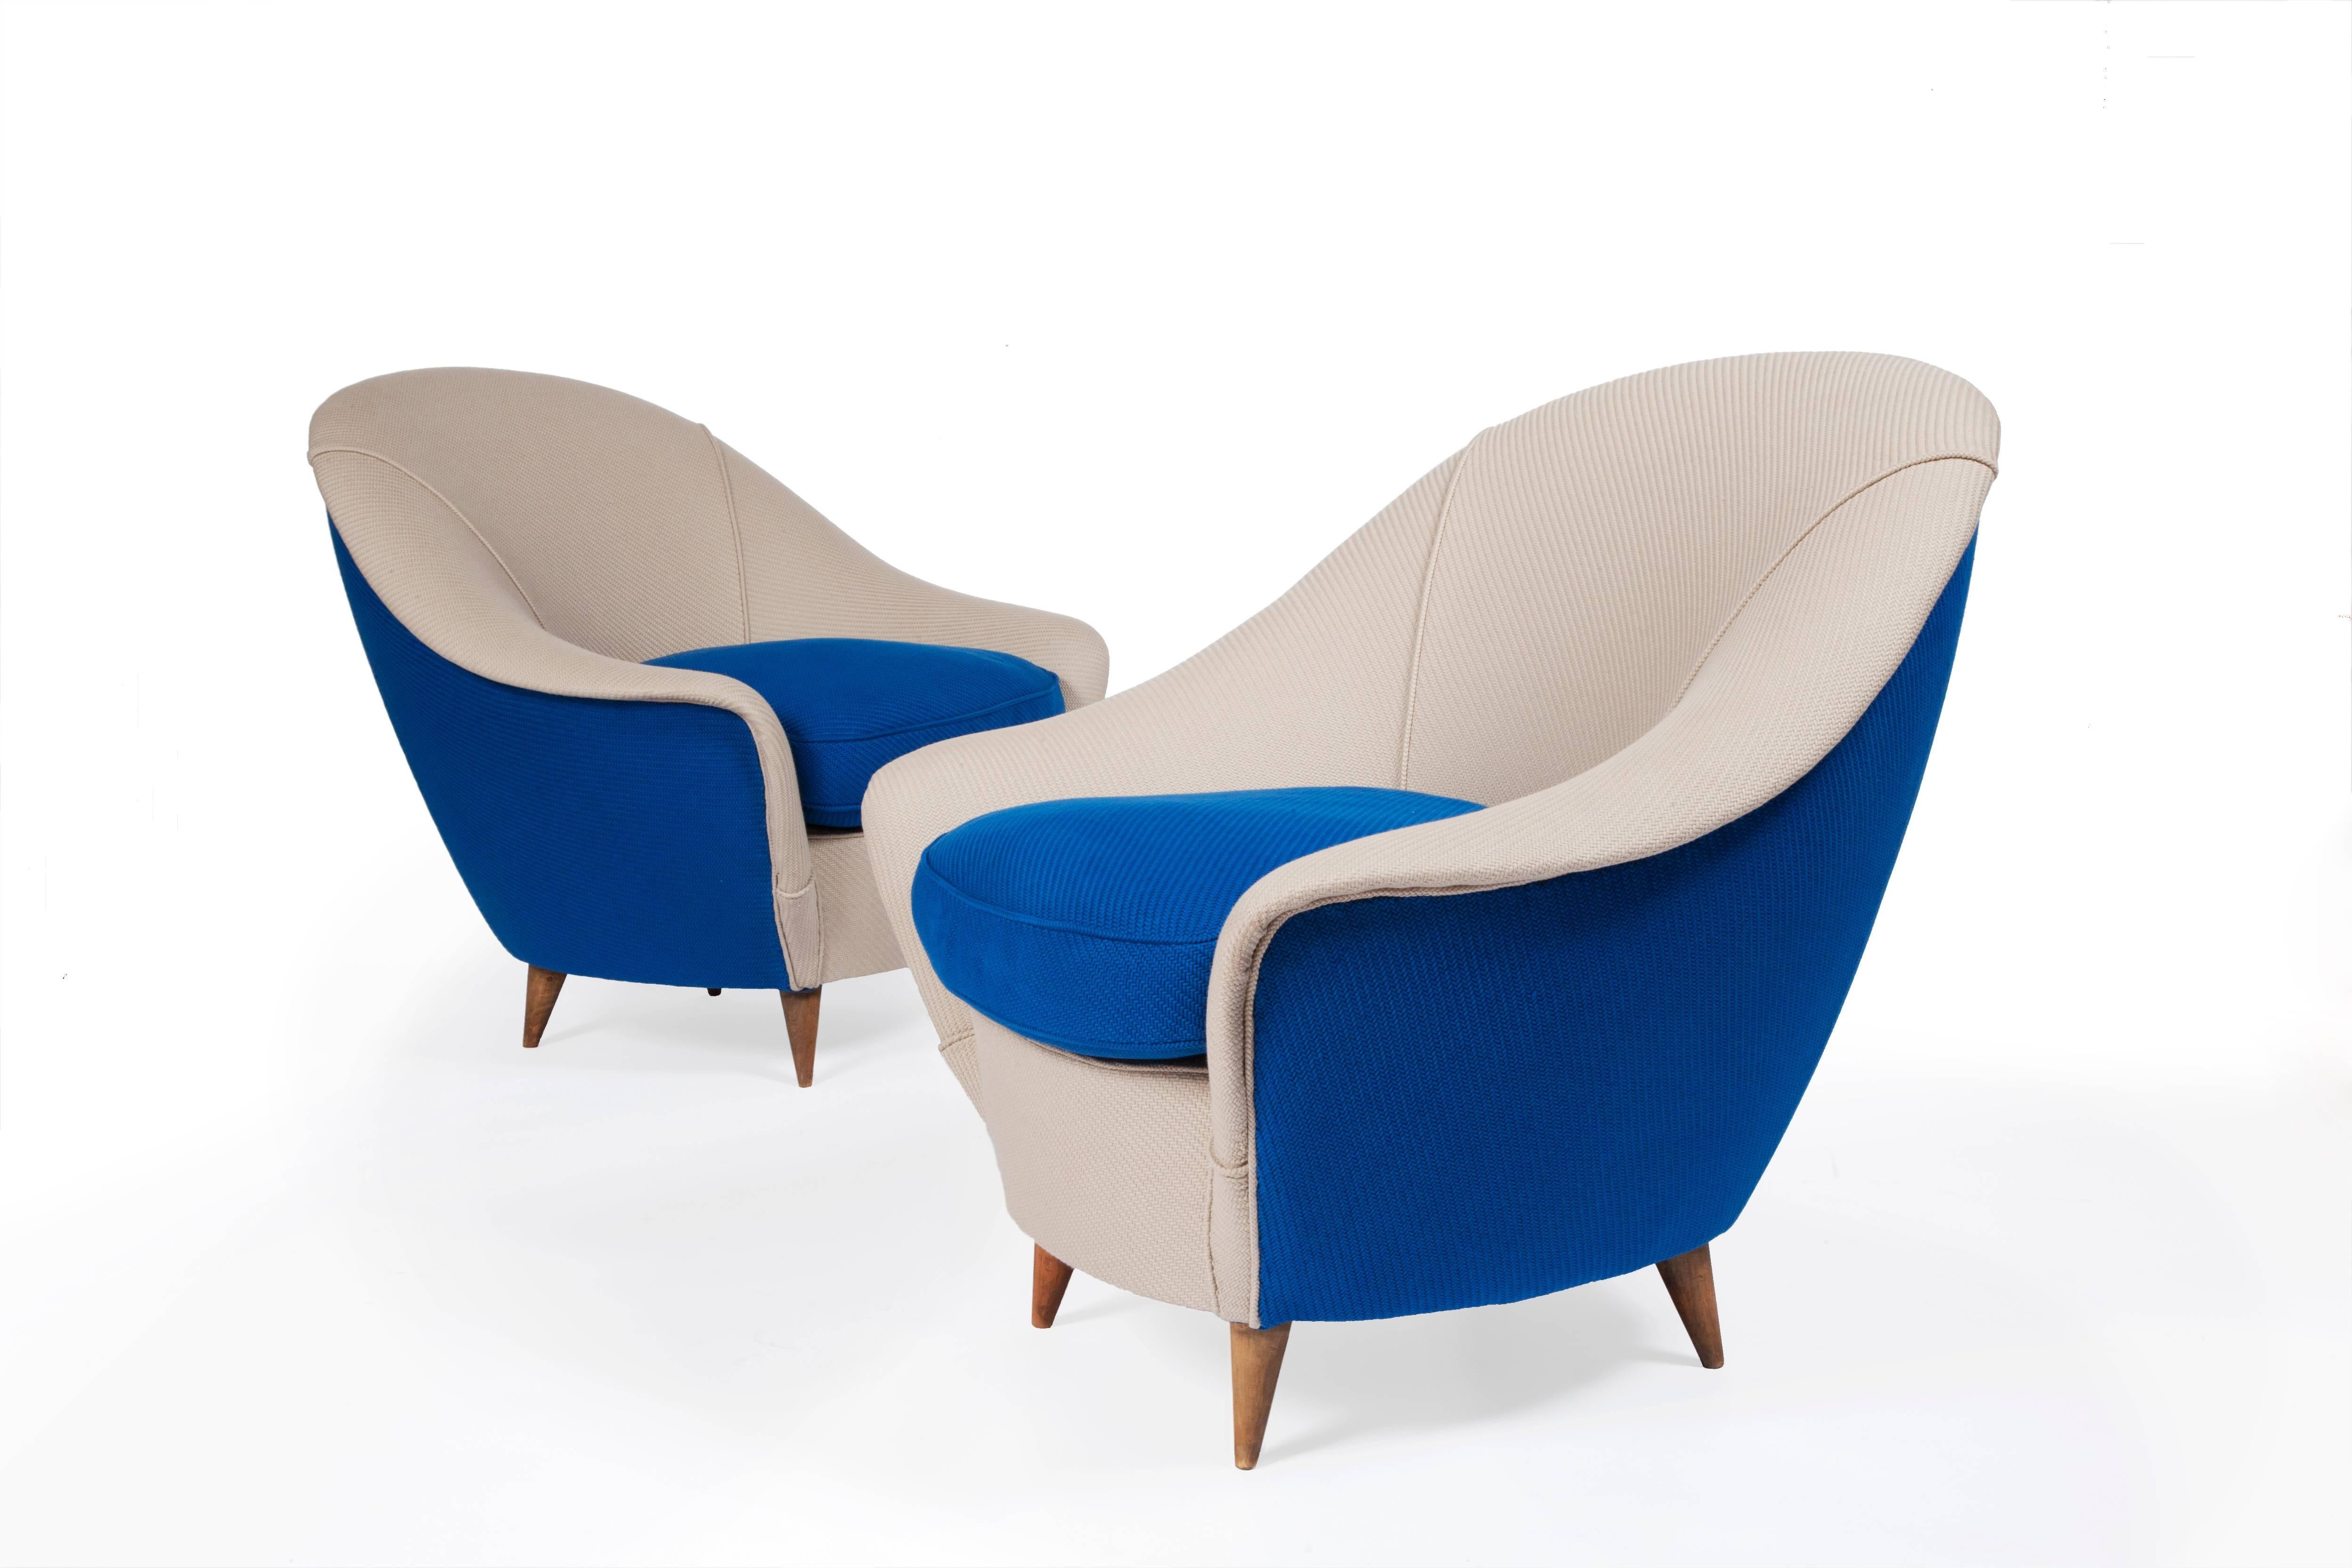 Pair of egg-shaped 1950s Italian armchairs re-upholstered in their original two-tones color fabric. Wooden conical feet.